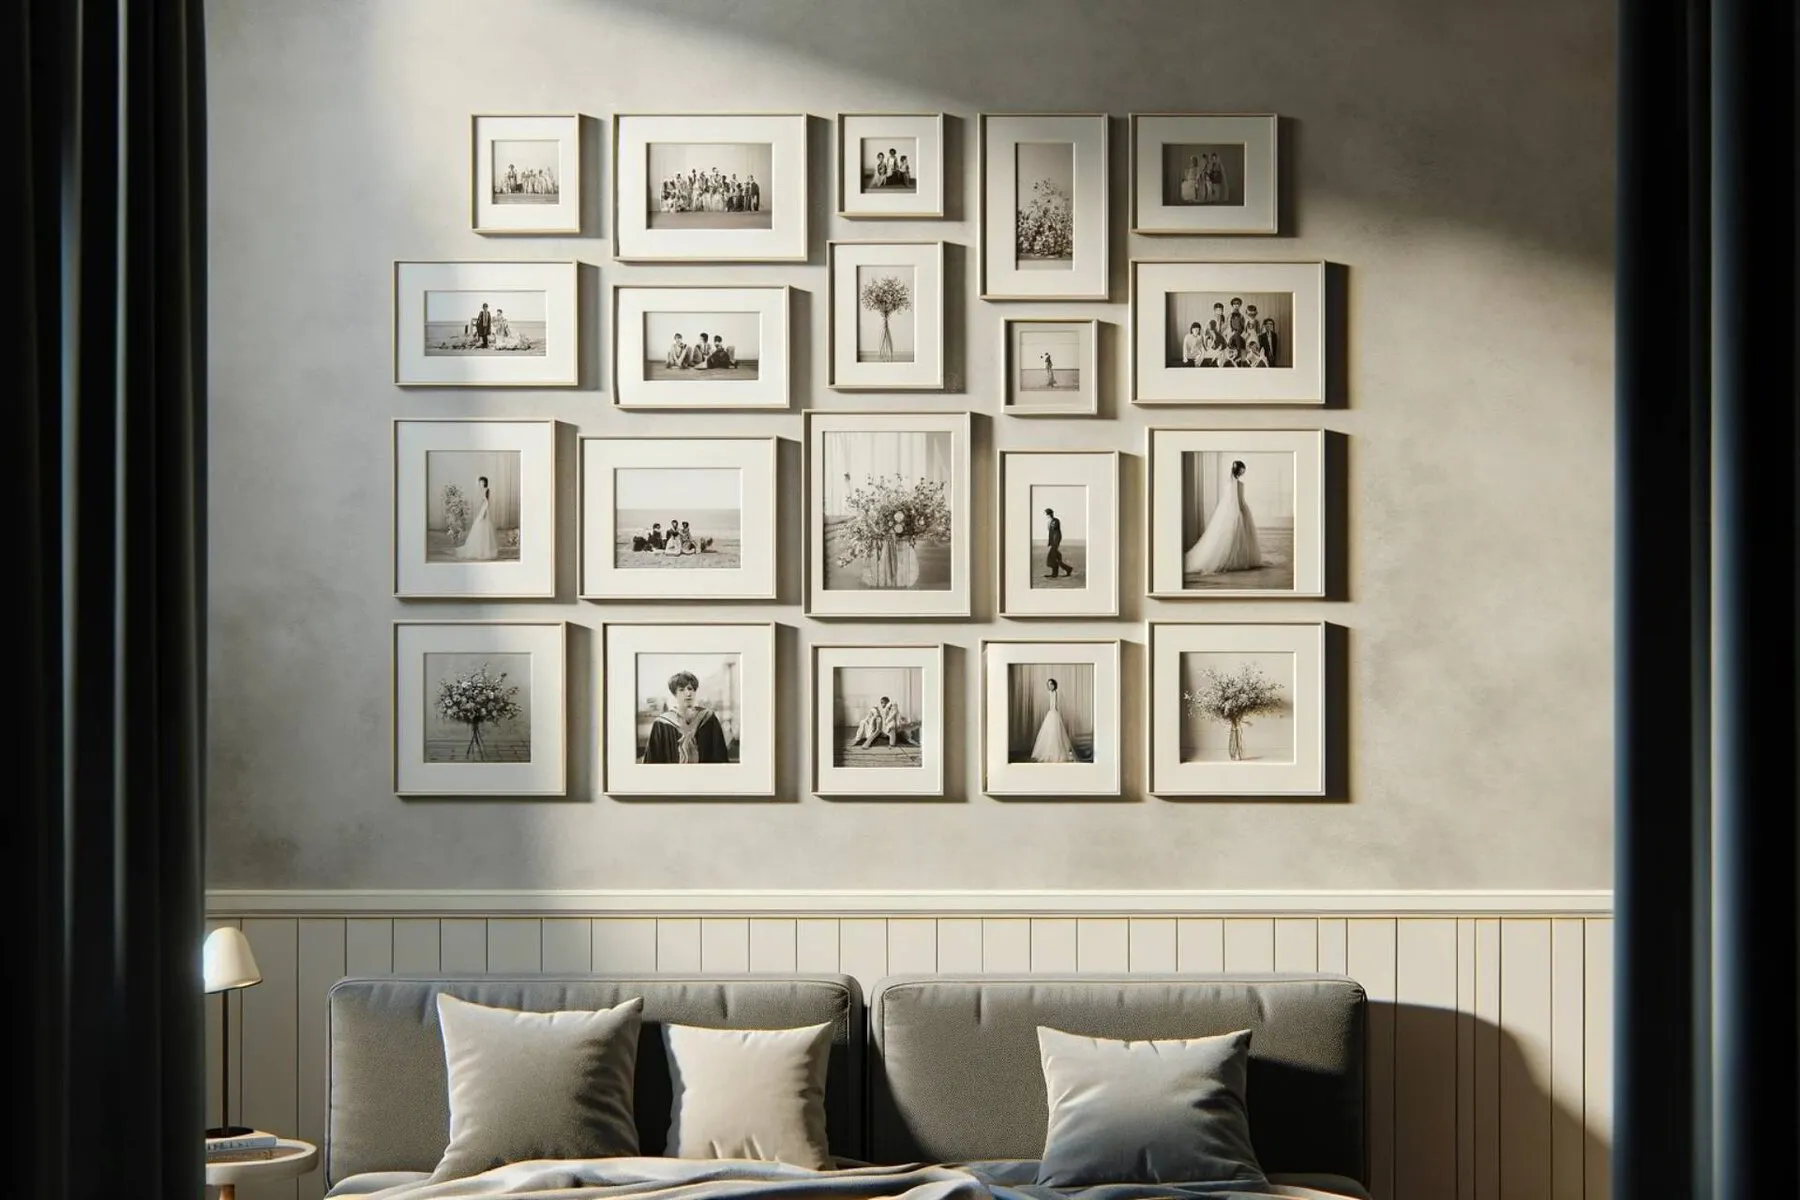 A subtle and sophisticated wall decor concept for commemorating special occasions